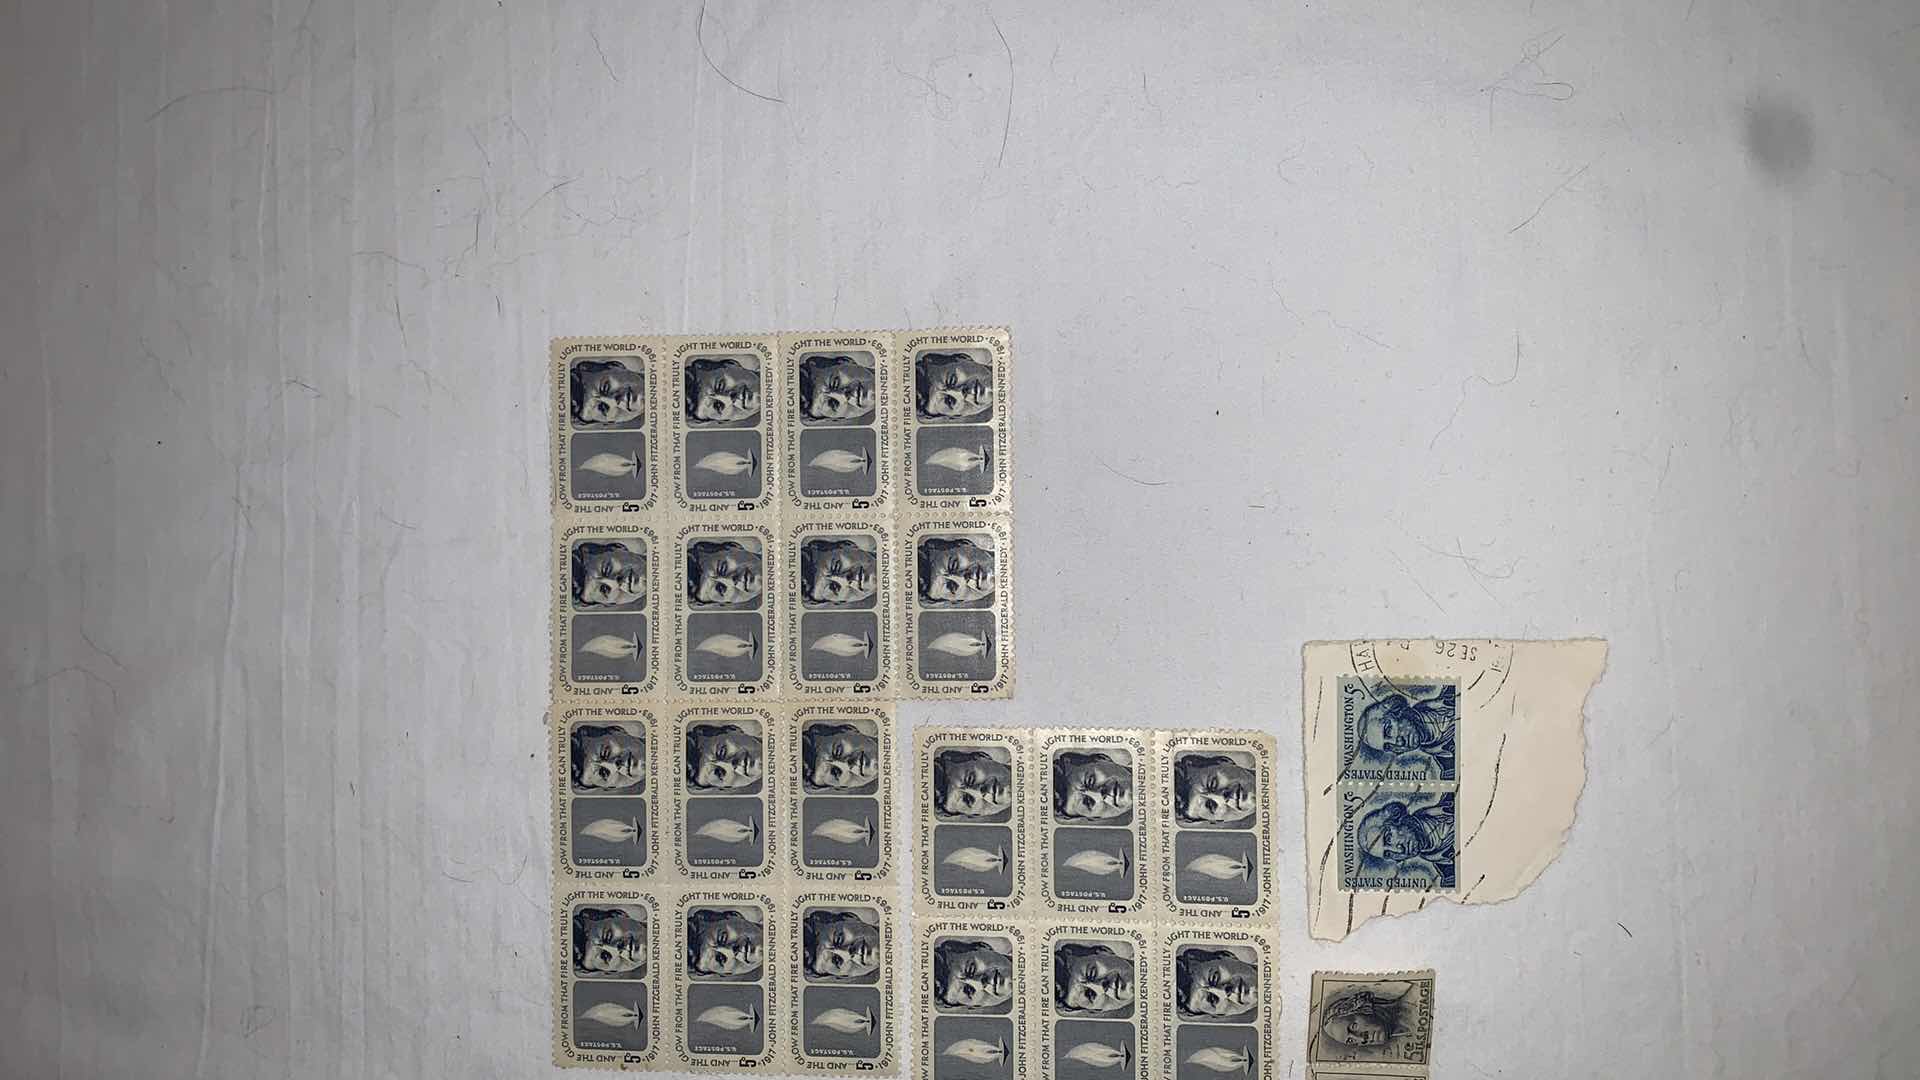 Photo 5 of UNITED STATES STAMPS PRESIDENTS AND BUNKER HILL